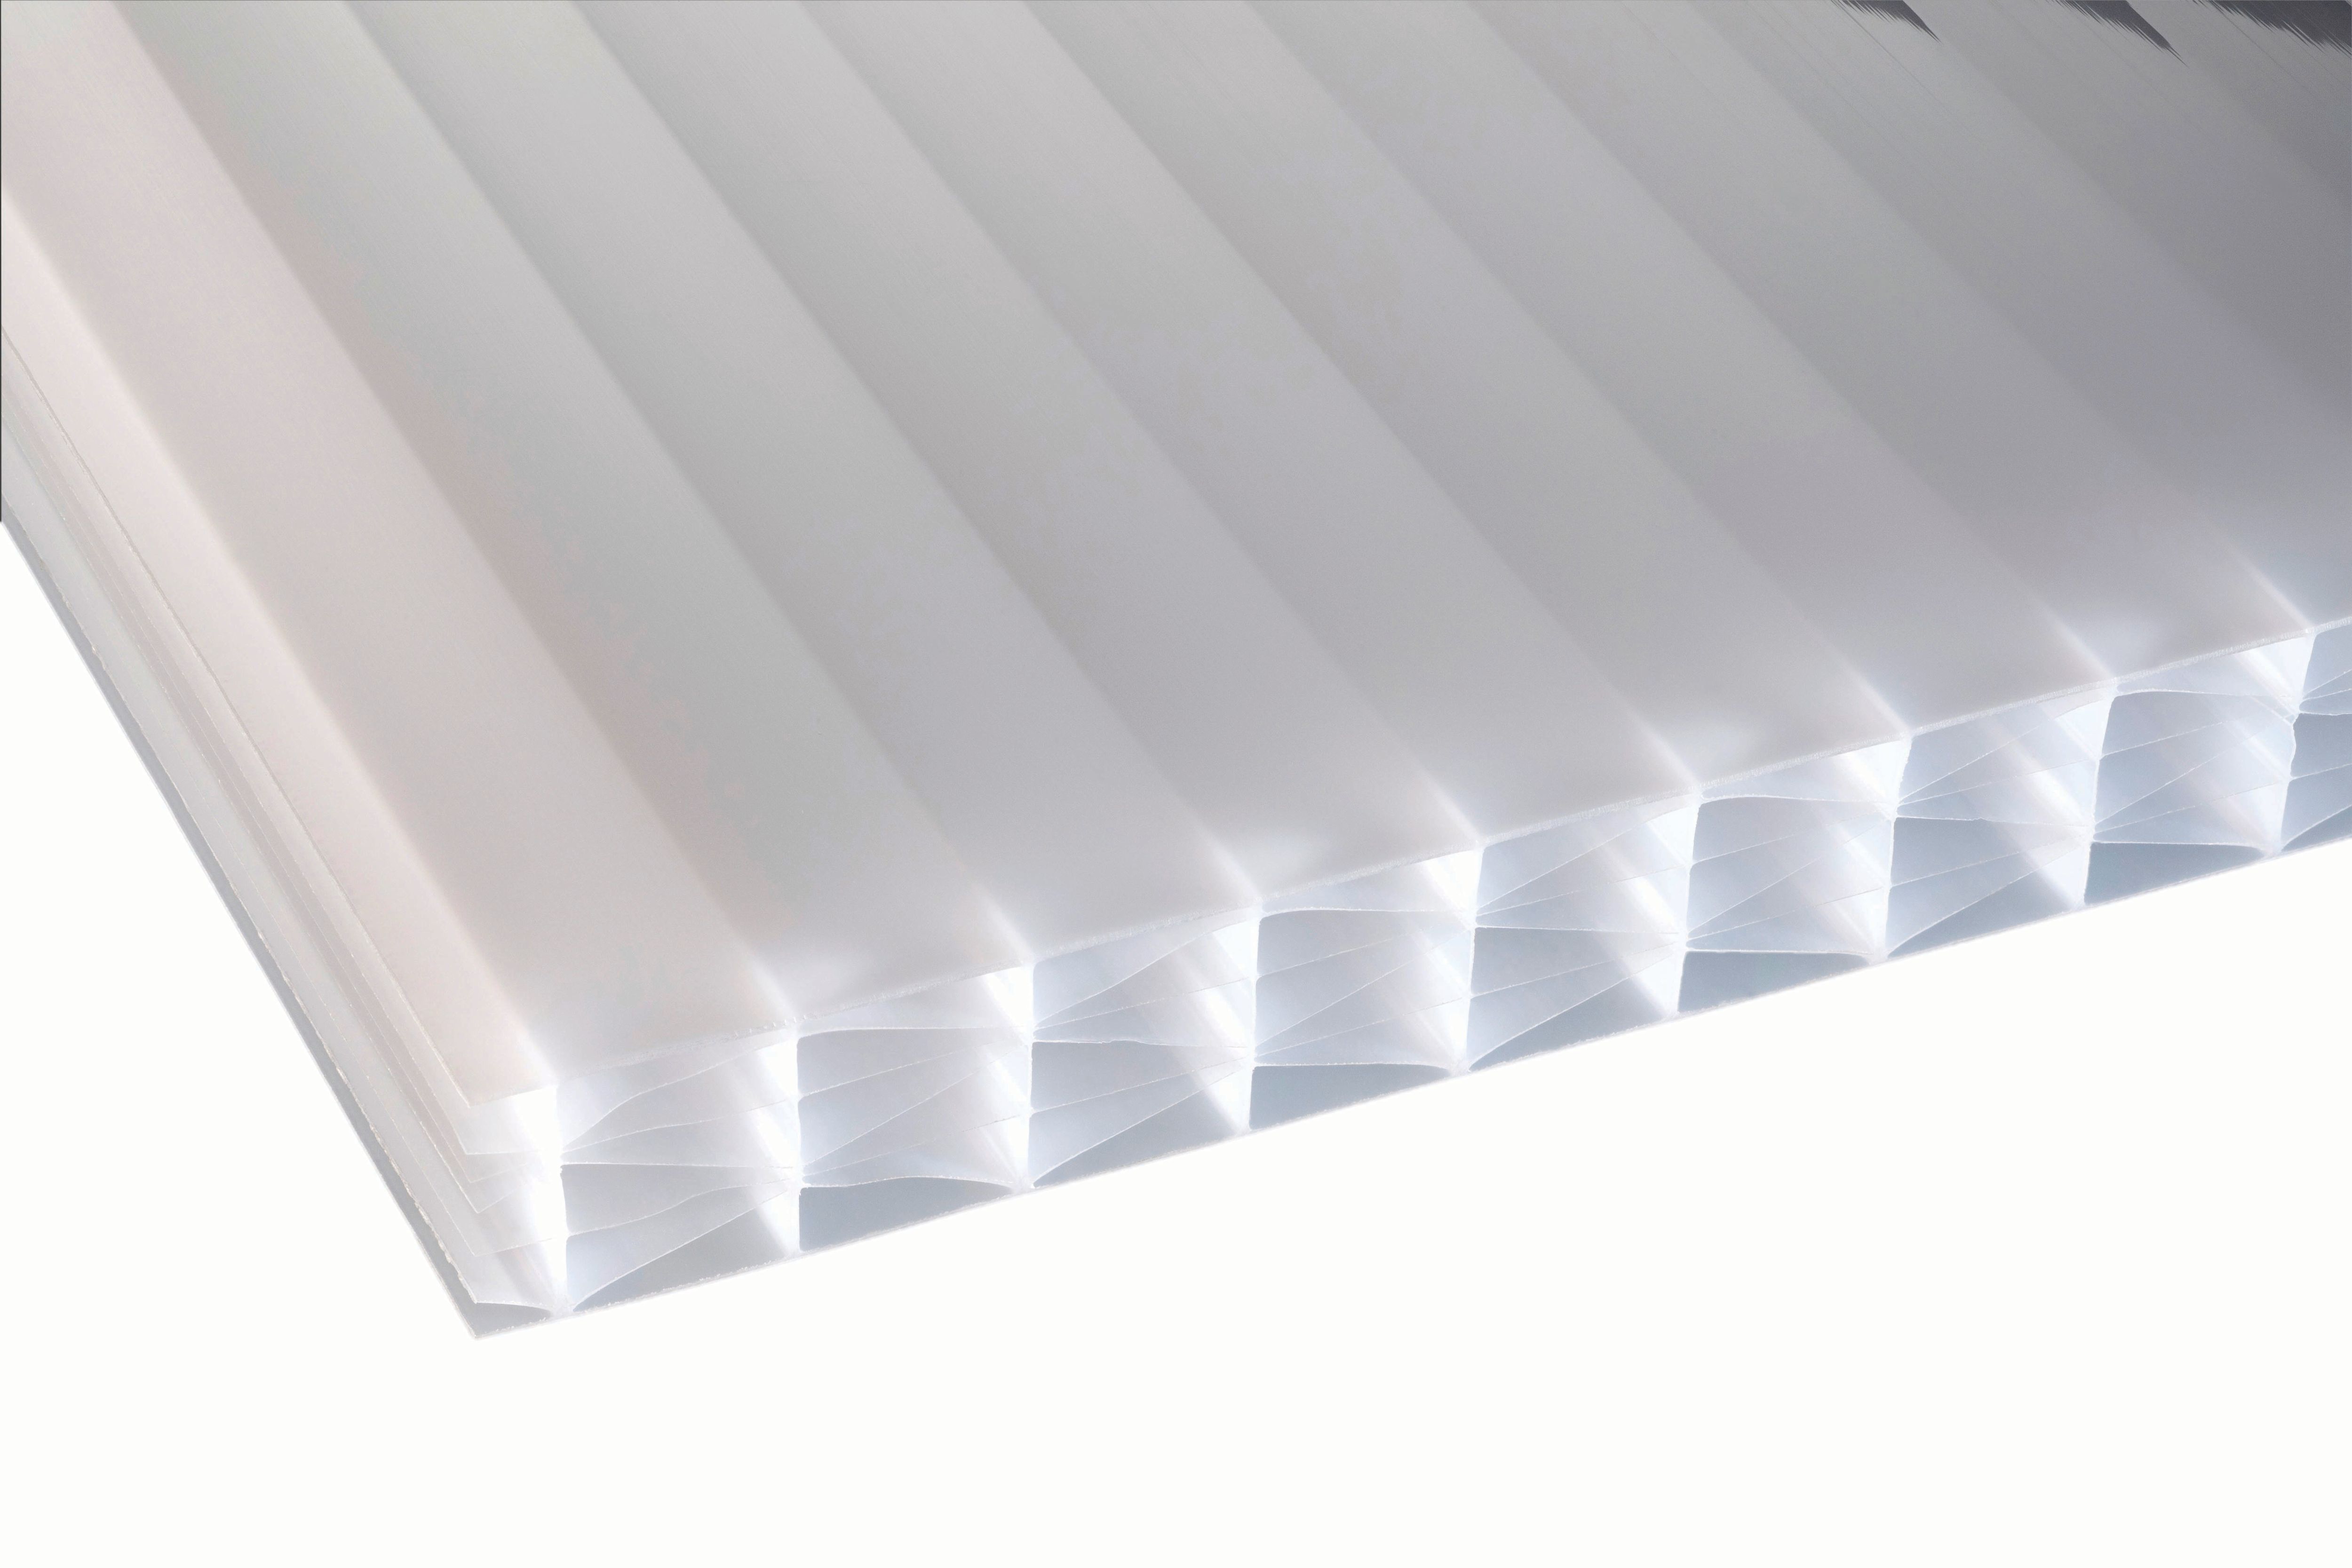 Image of 25mm Opal Multiwall Polycarbonate Sheet - 2500 x 700mm